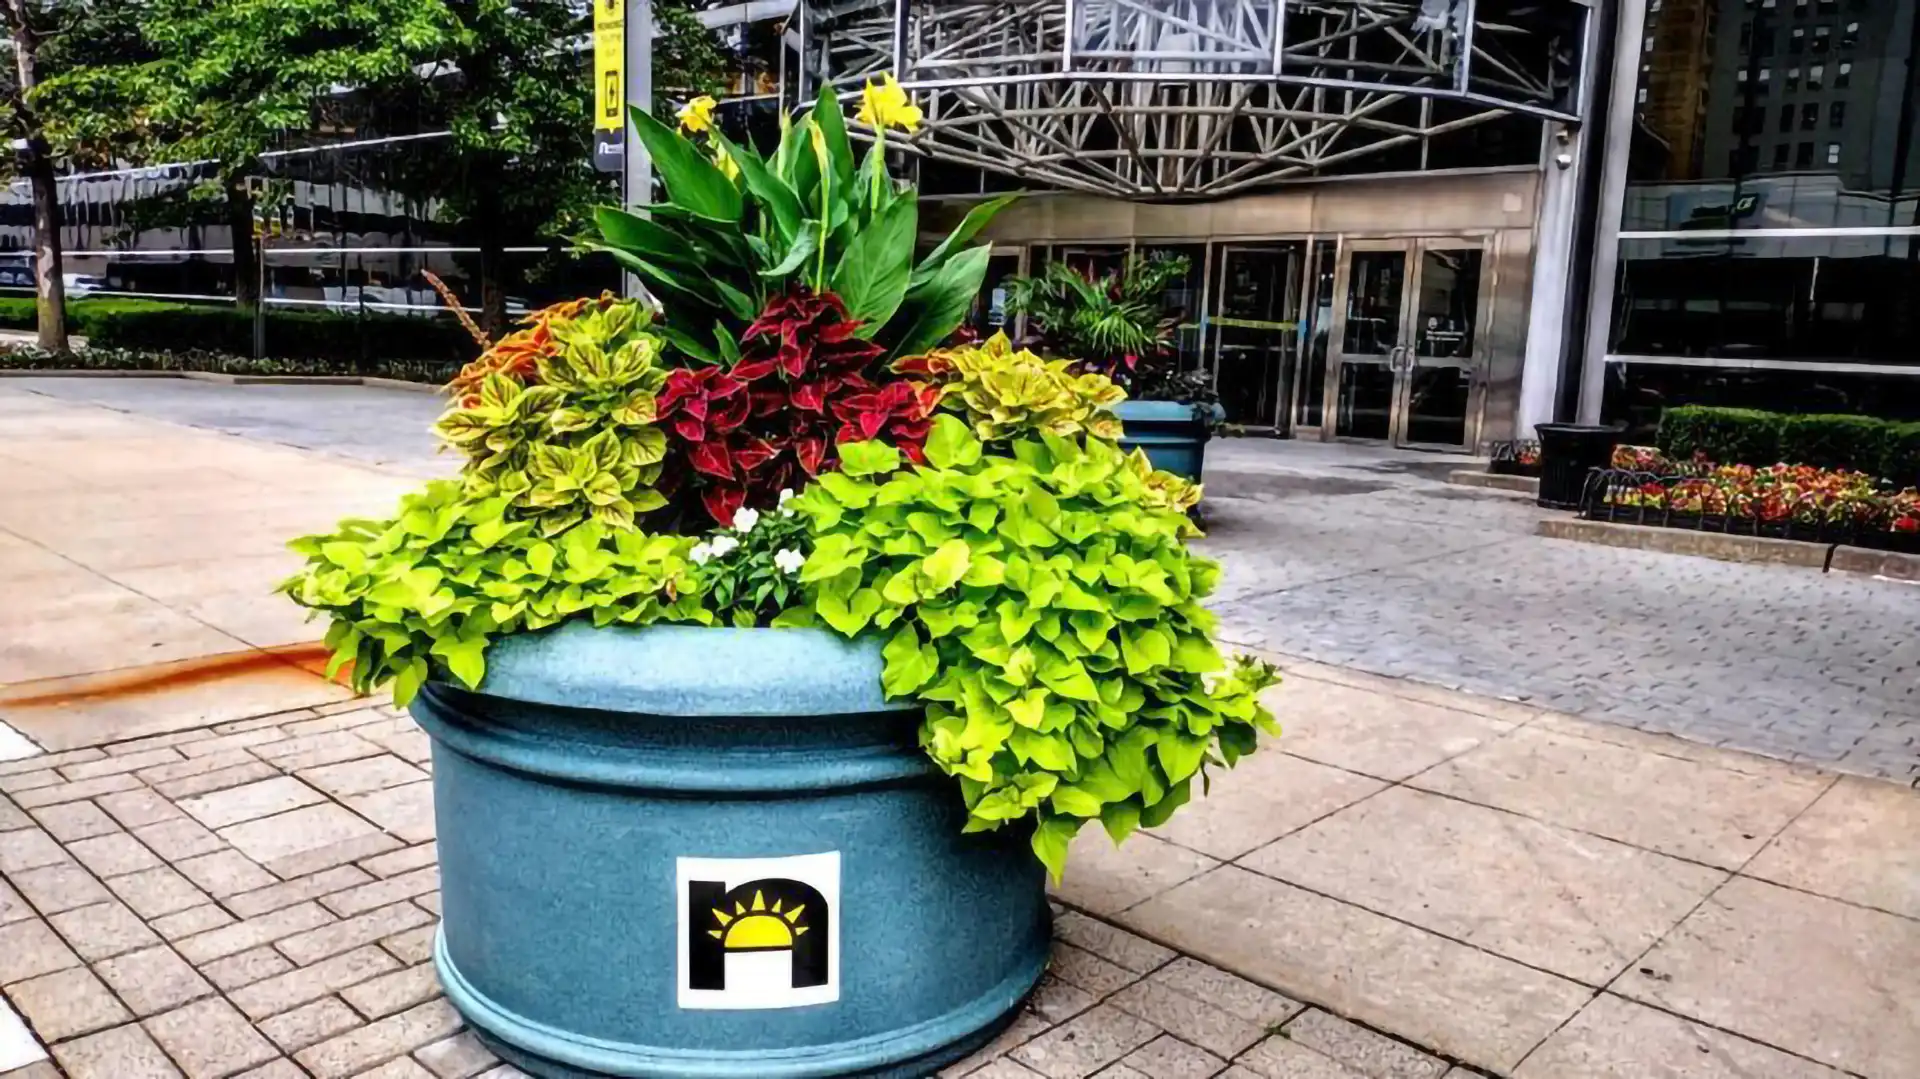 A planter on the street of downtown Newark.